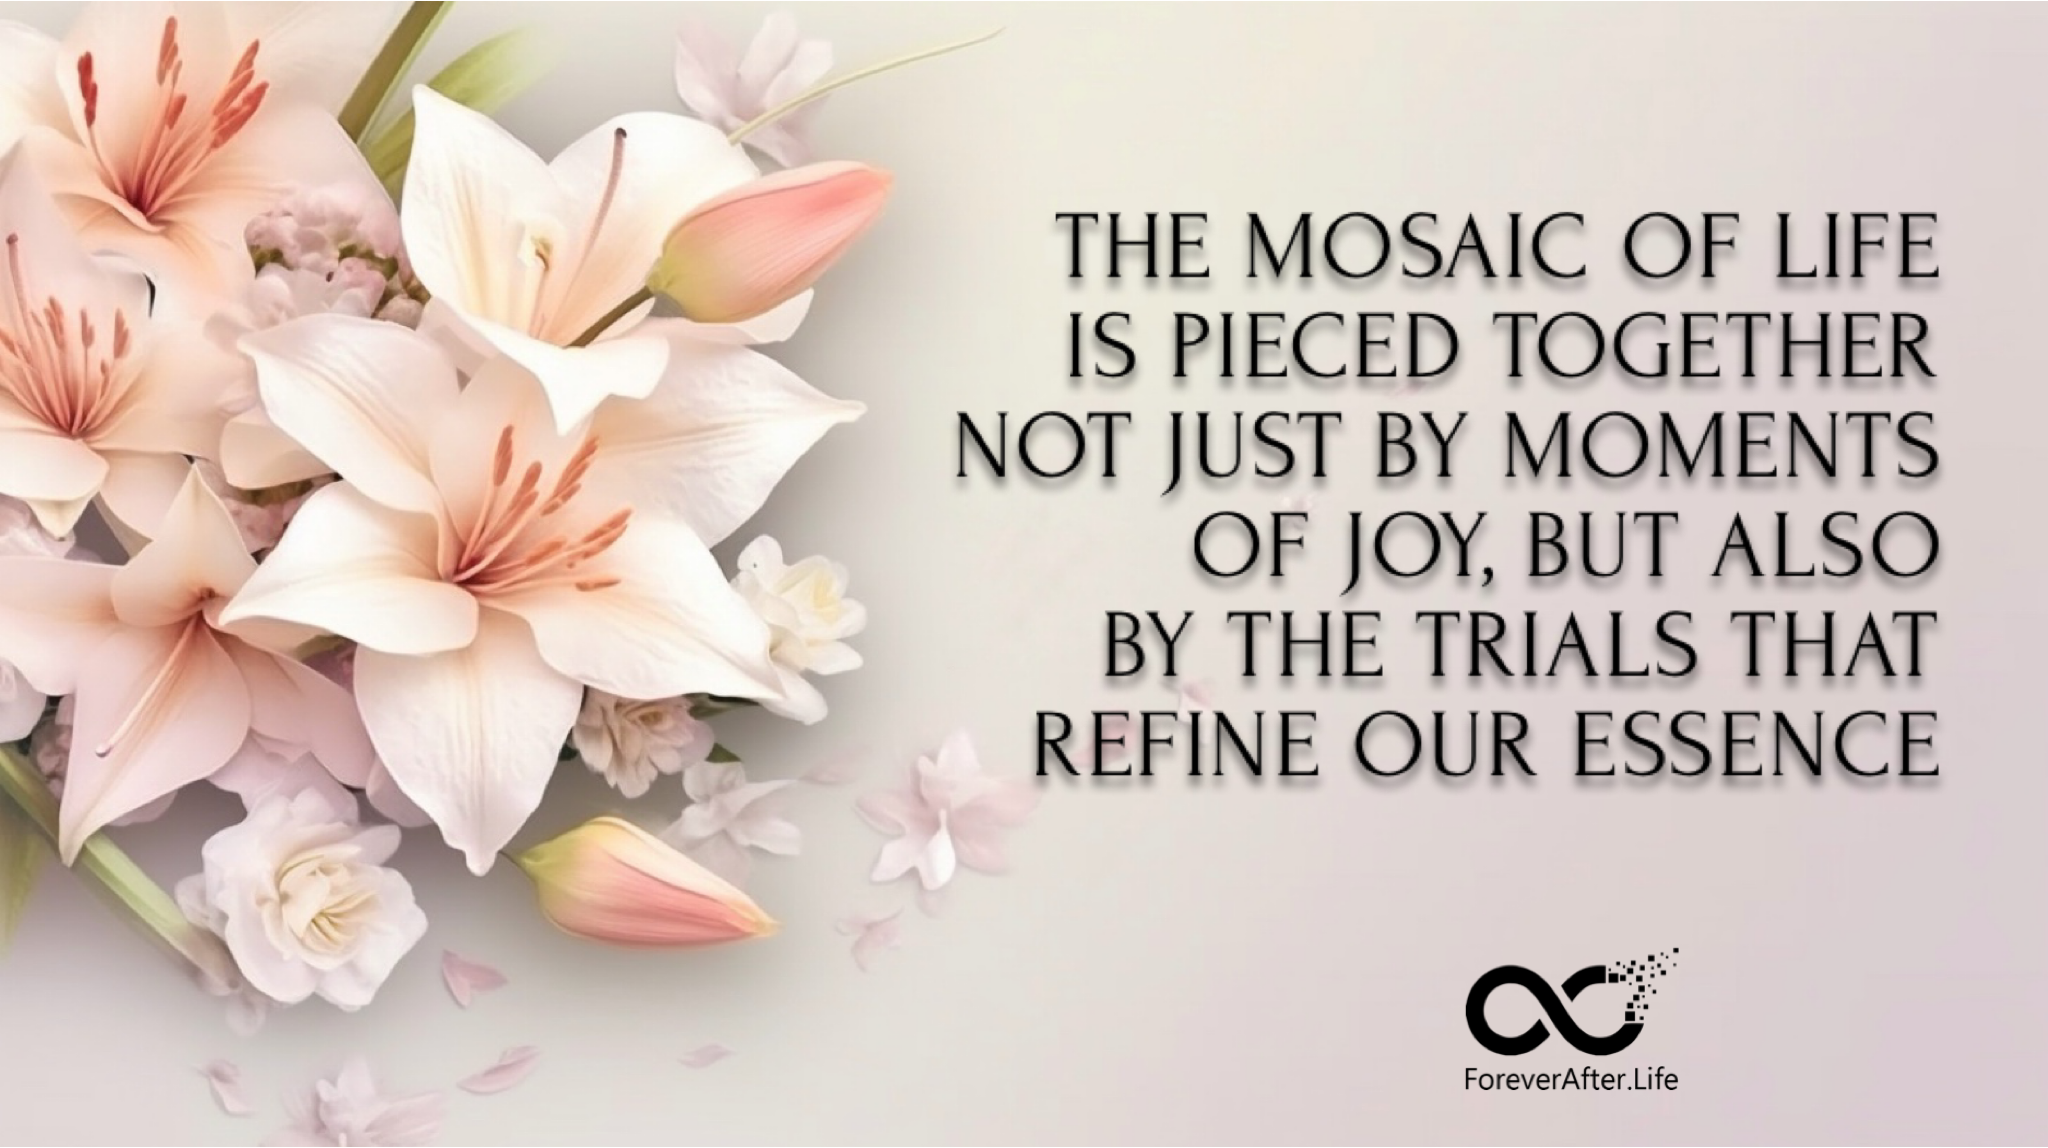 The mosaic of life is pieced together not just by moments of joy, but also by the trials that refine our essence